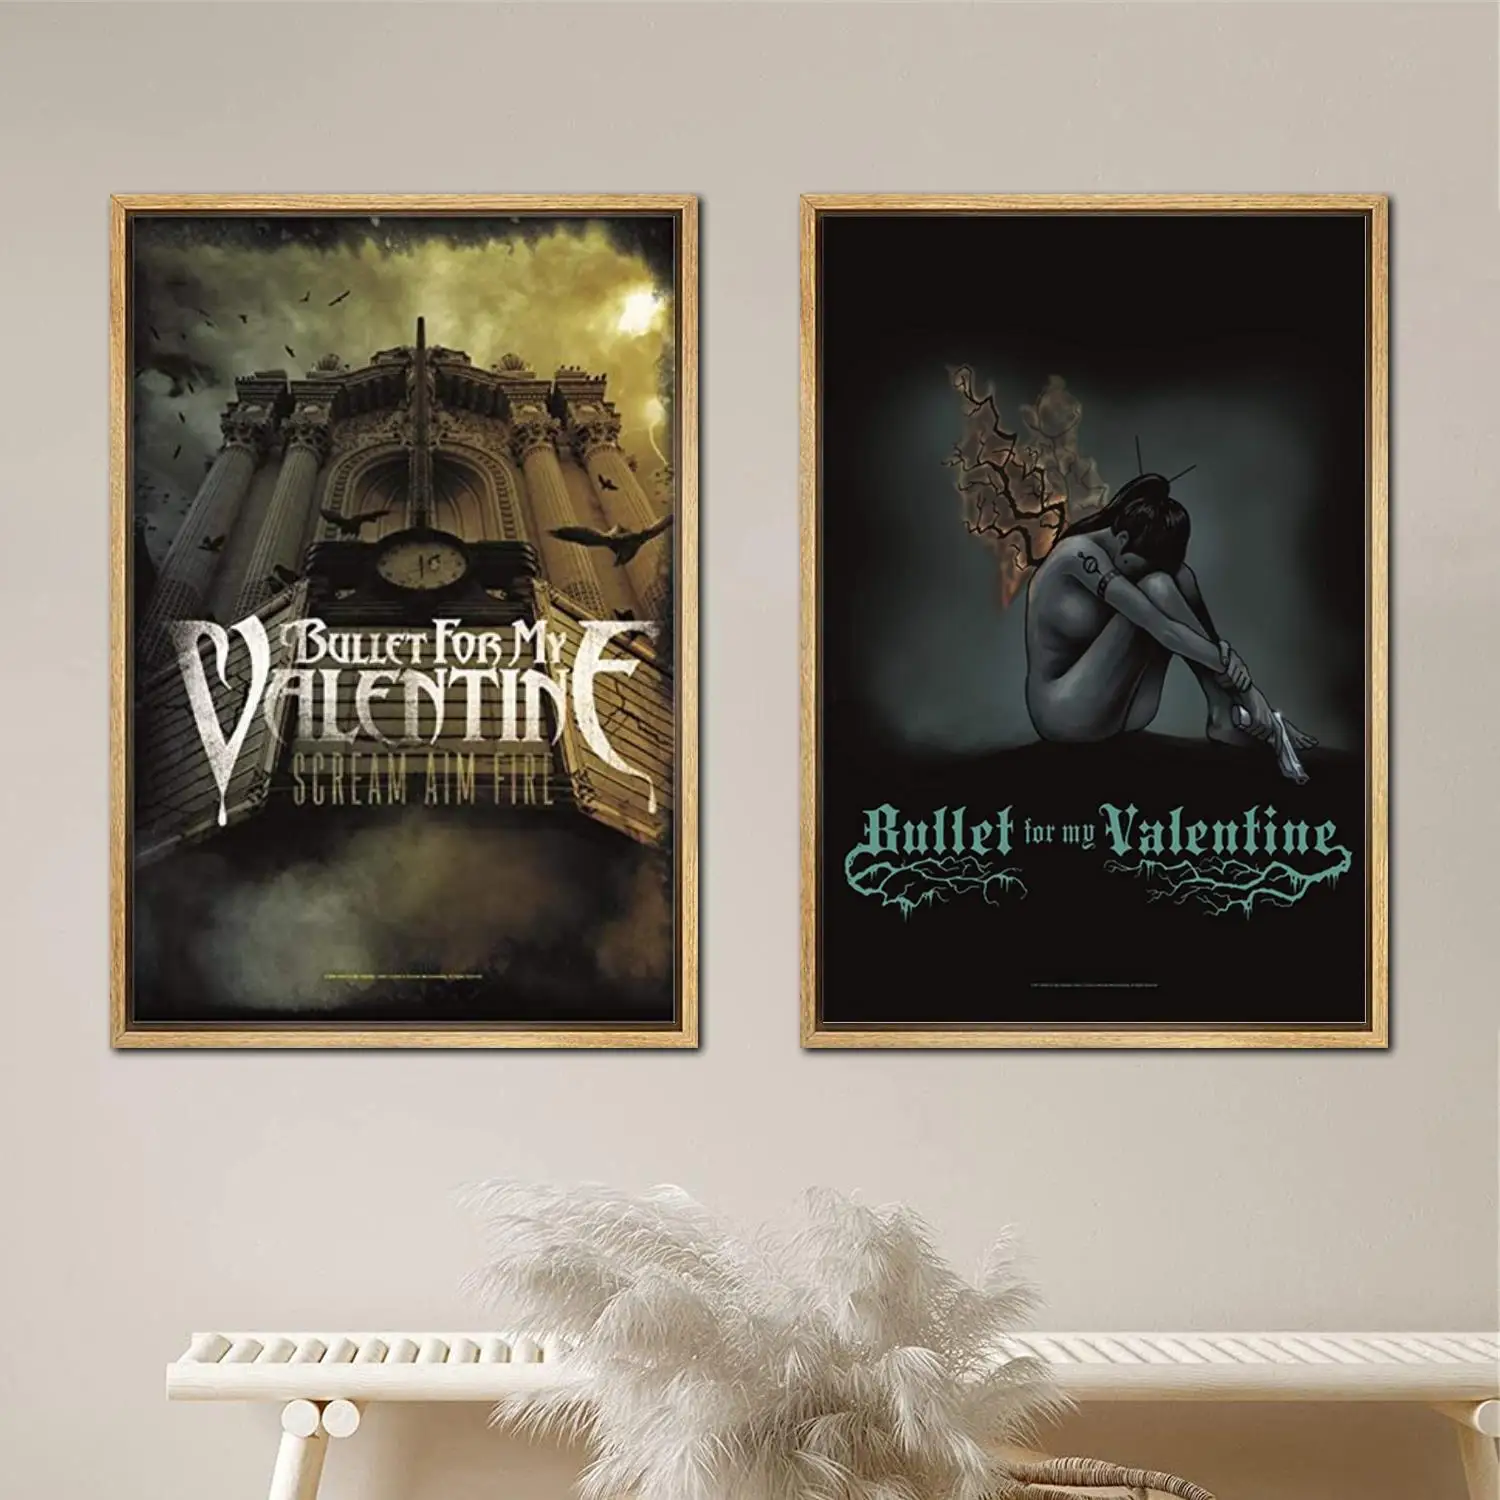 

Bullet for My Valentine Poster Painting 24x36 Wall Art Canvas Posters room decor Modern Family bedroom Decoration Art wall decor